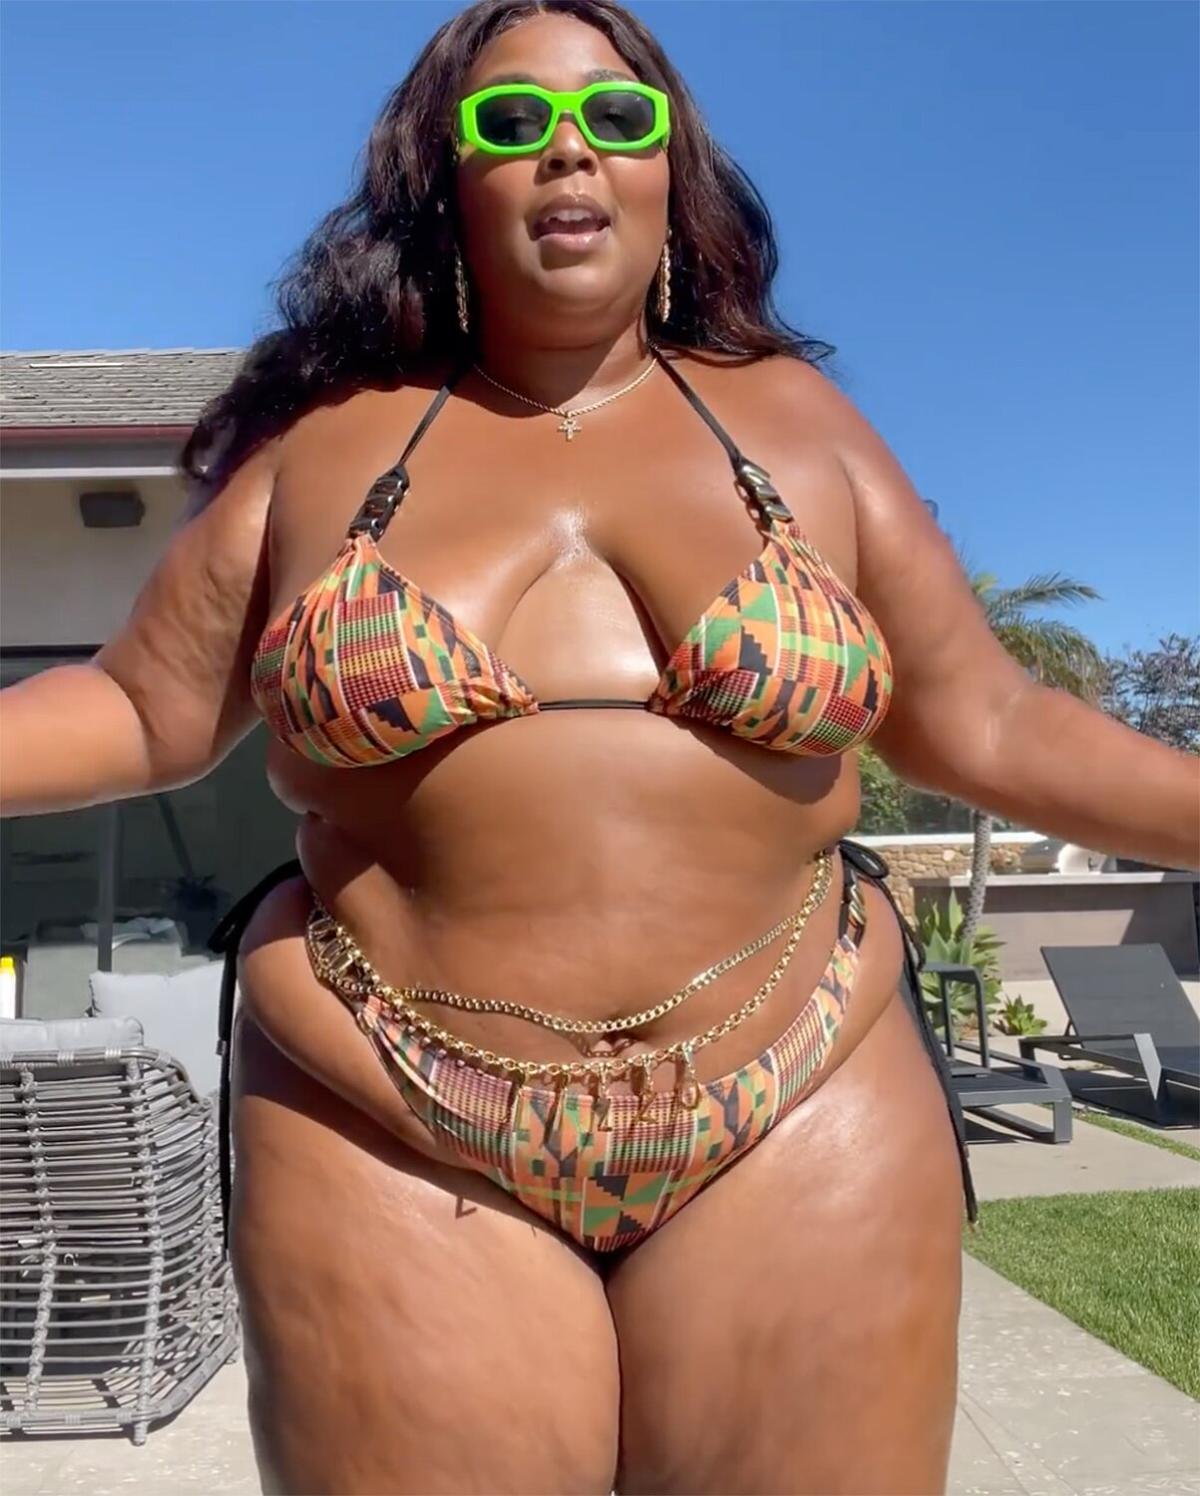 bryan wrenn recommends big woman in thong pic